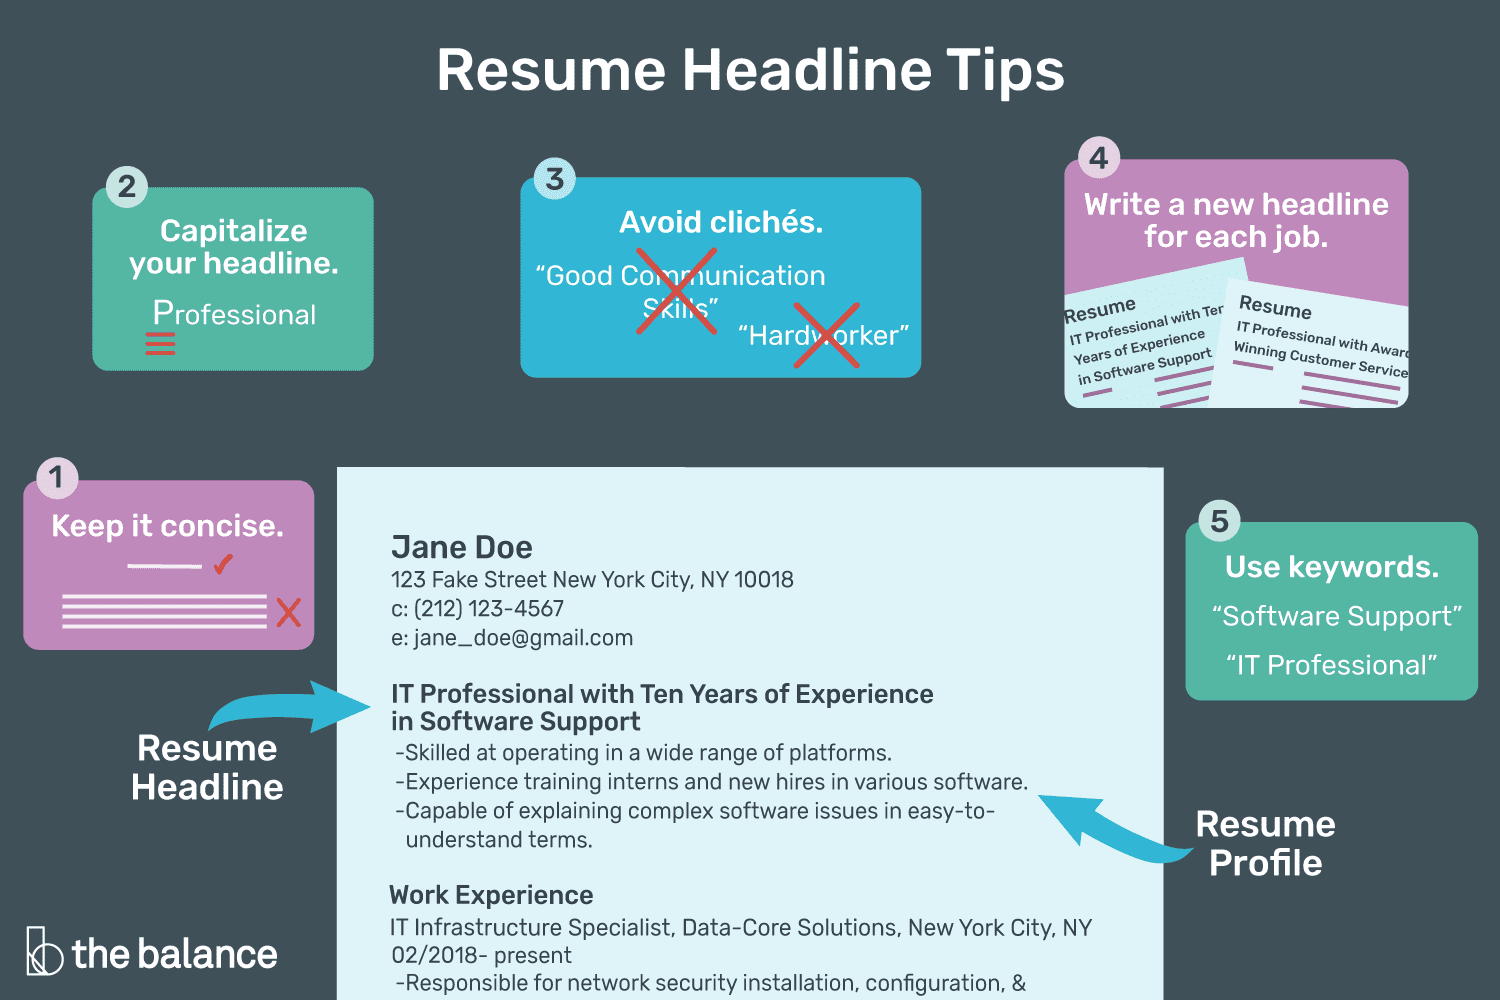 How to Write a Resume Headline With Examples